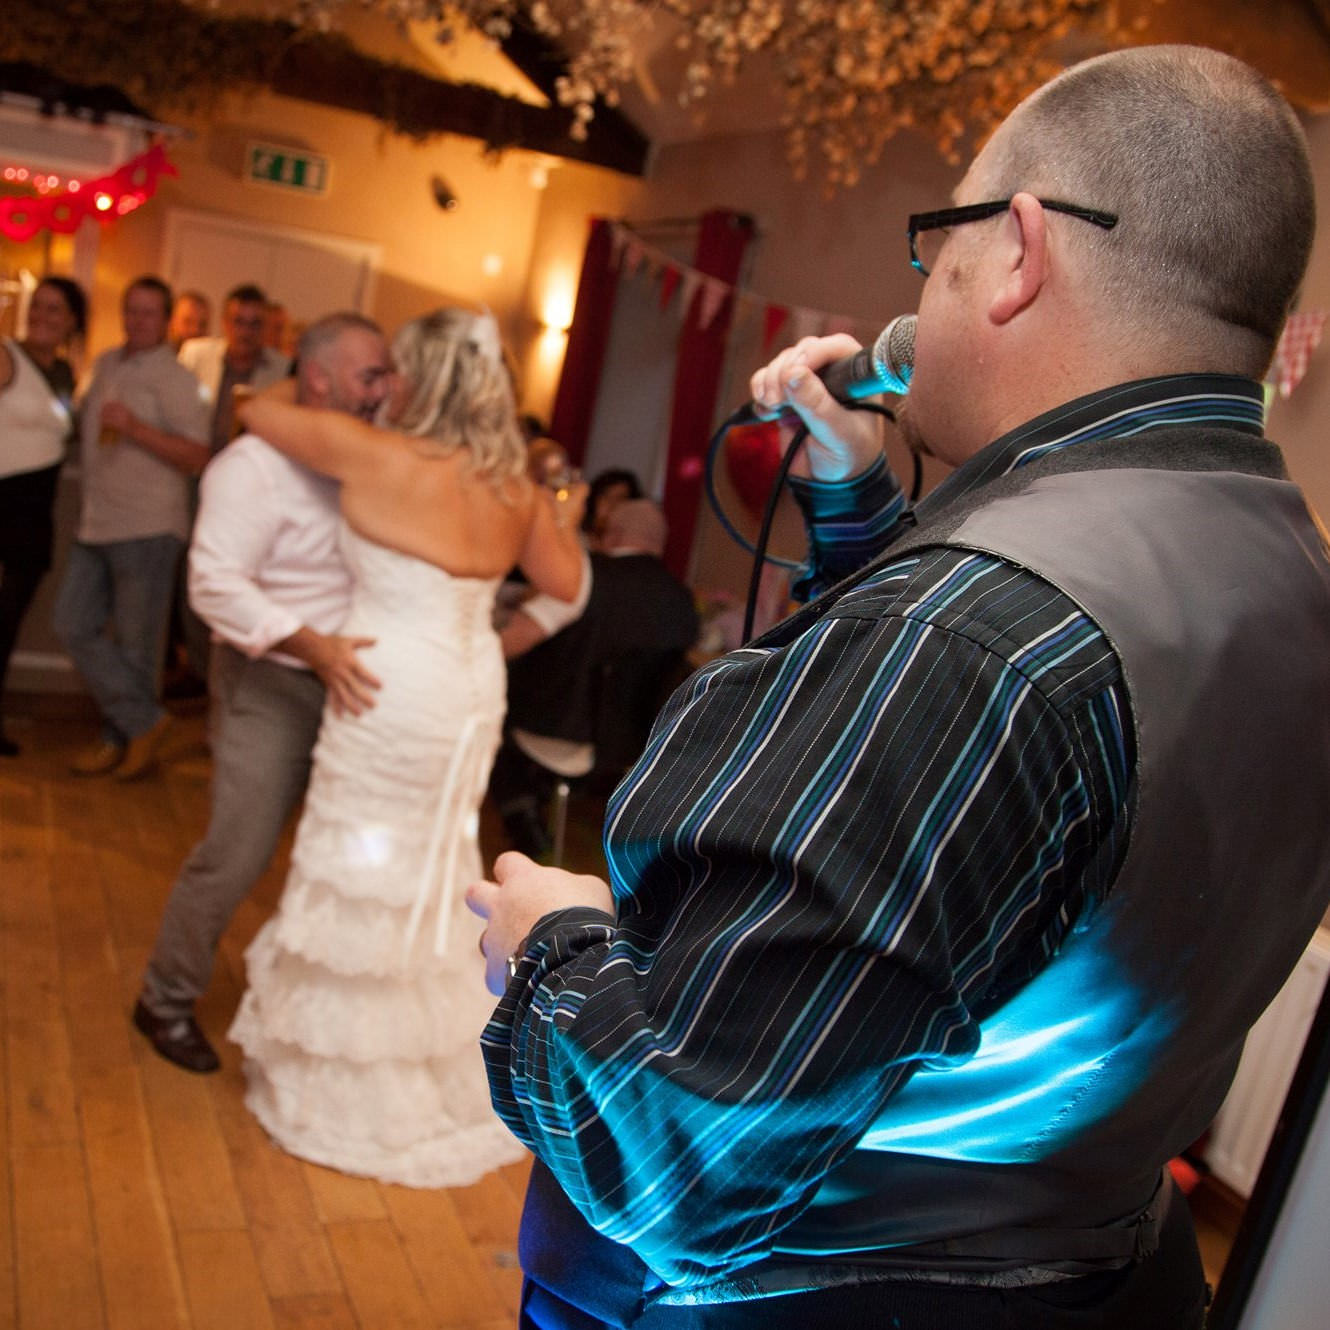 Jon Paul singer sings from stage to newlywed pair embraced in first dance at wedding reception near Bristol.